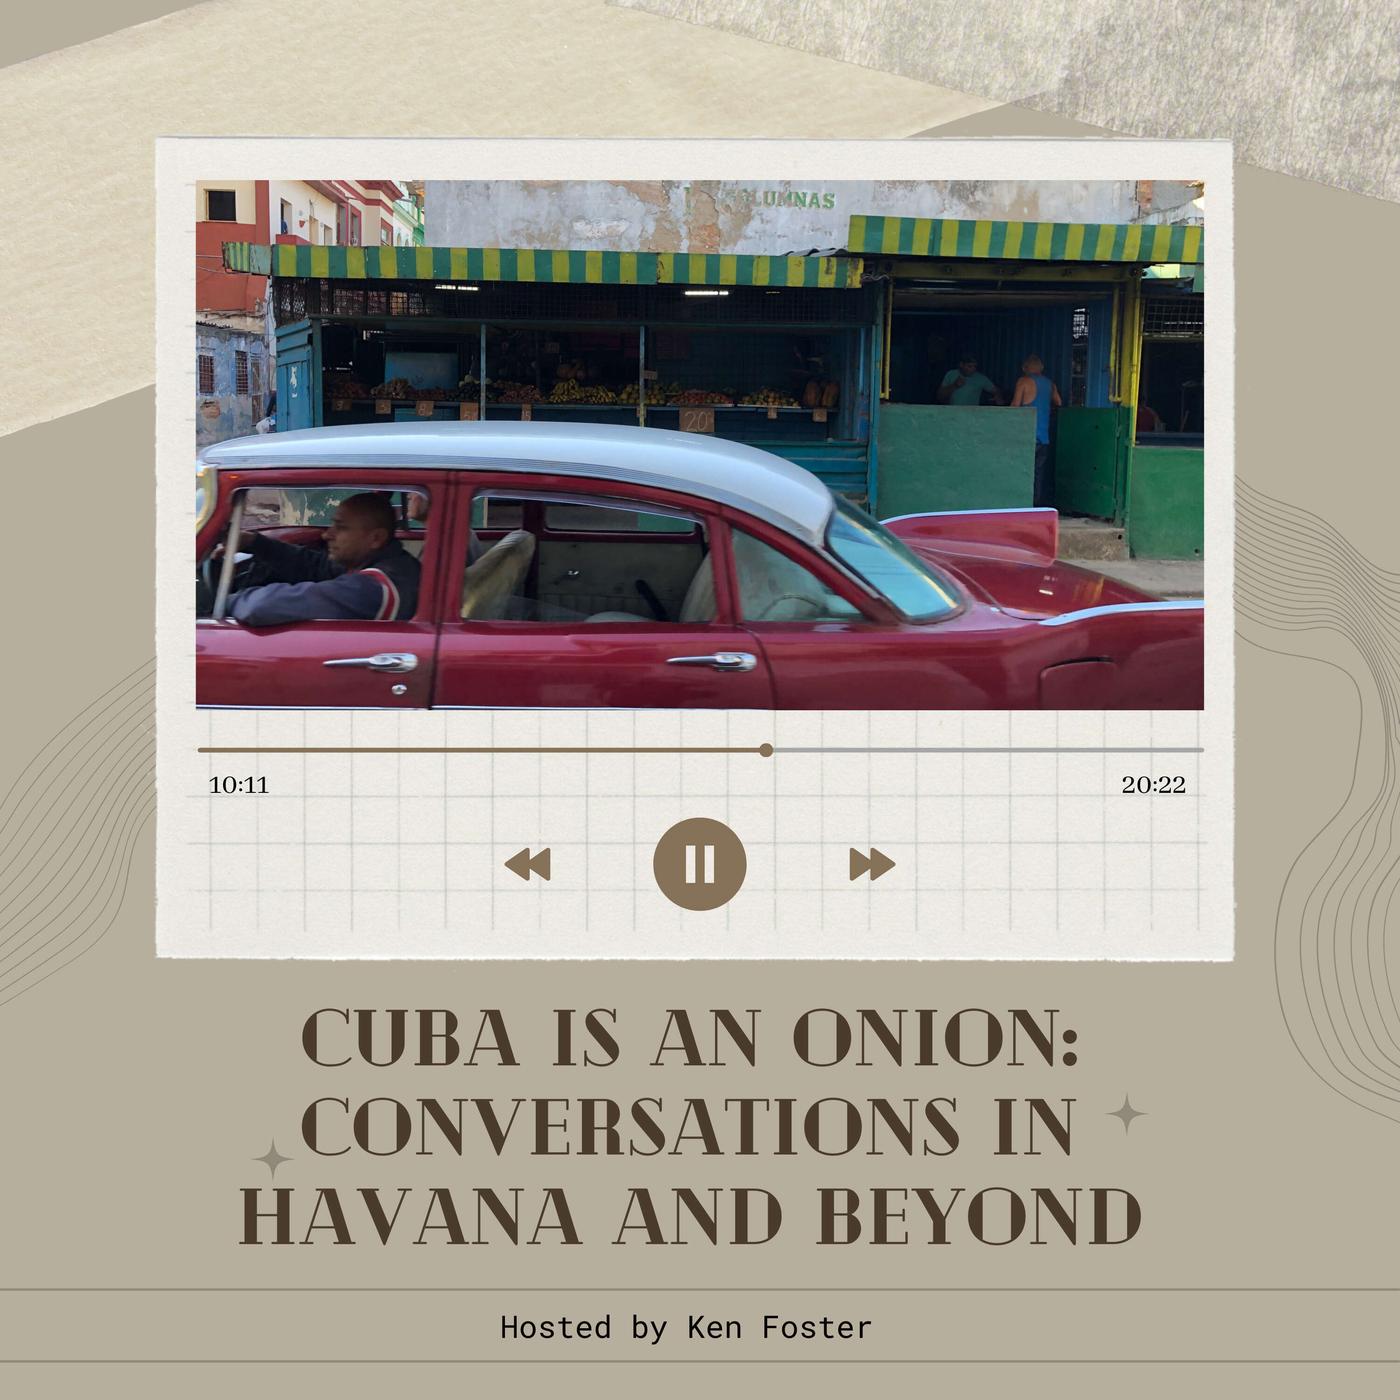 Cuba is an Onion: Conversations in Havana and Beyond